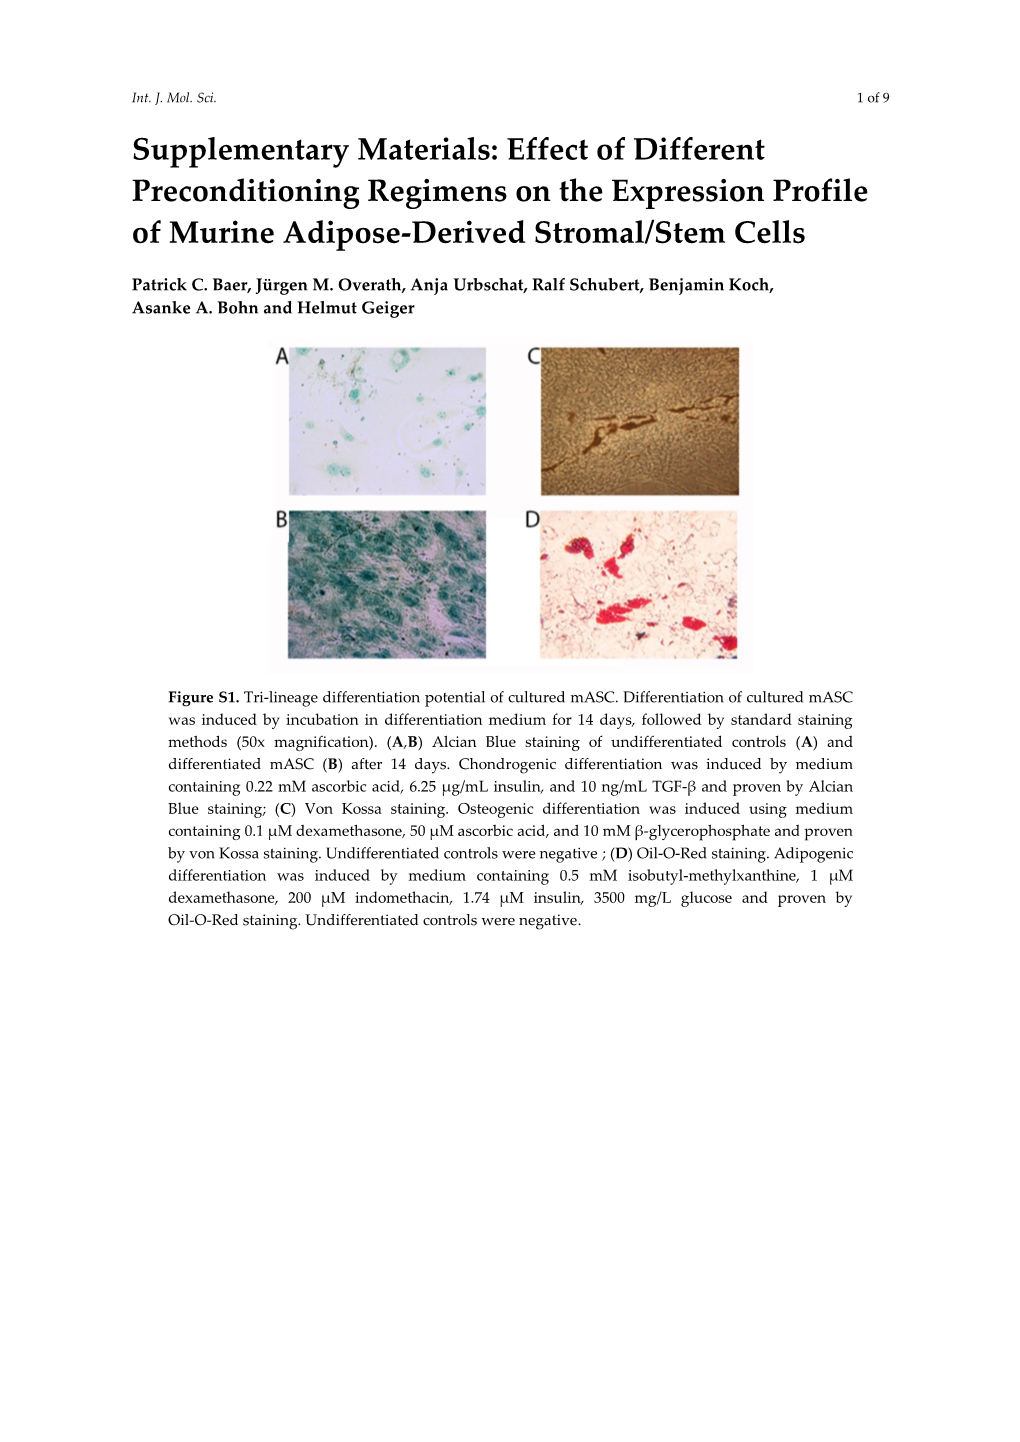 Effect of Different Preconditioning Regimens on the Expression Profile of Murine Adipose-Derived Stromal/Stem Cells